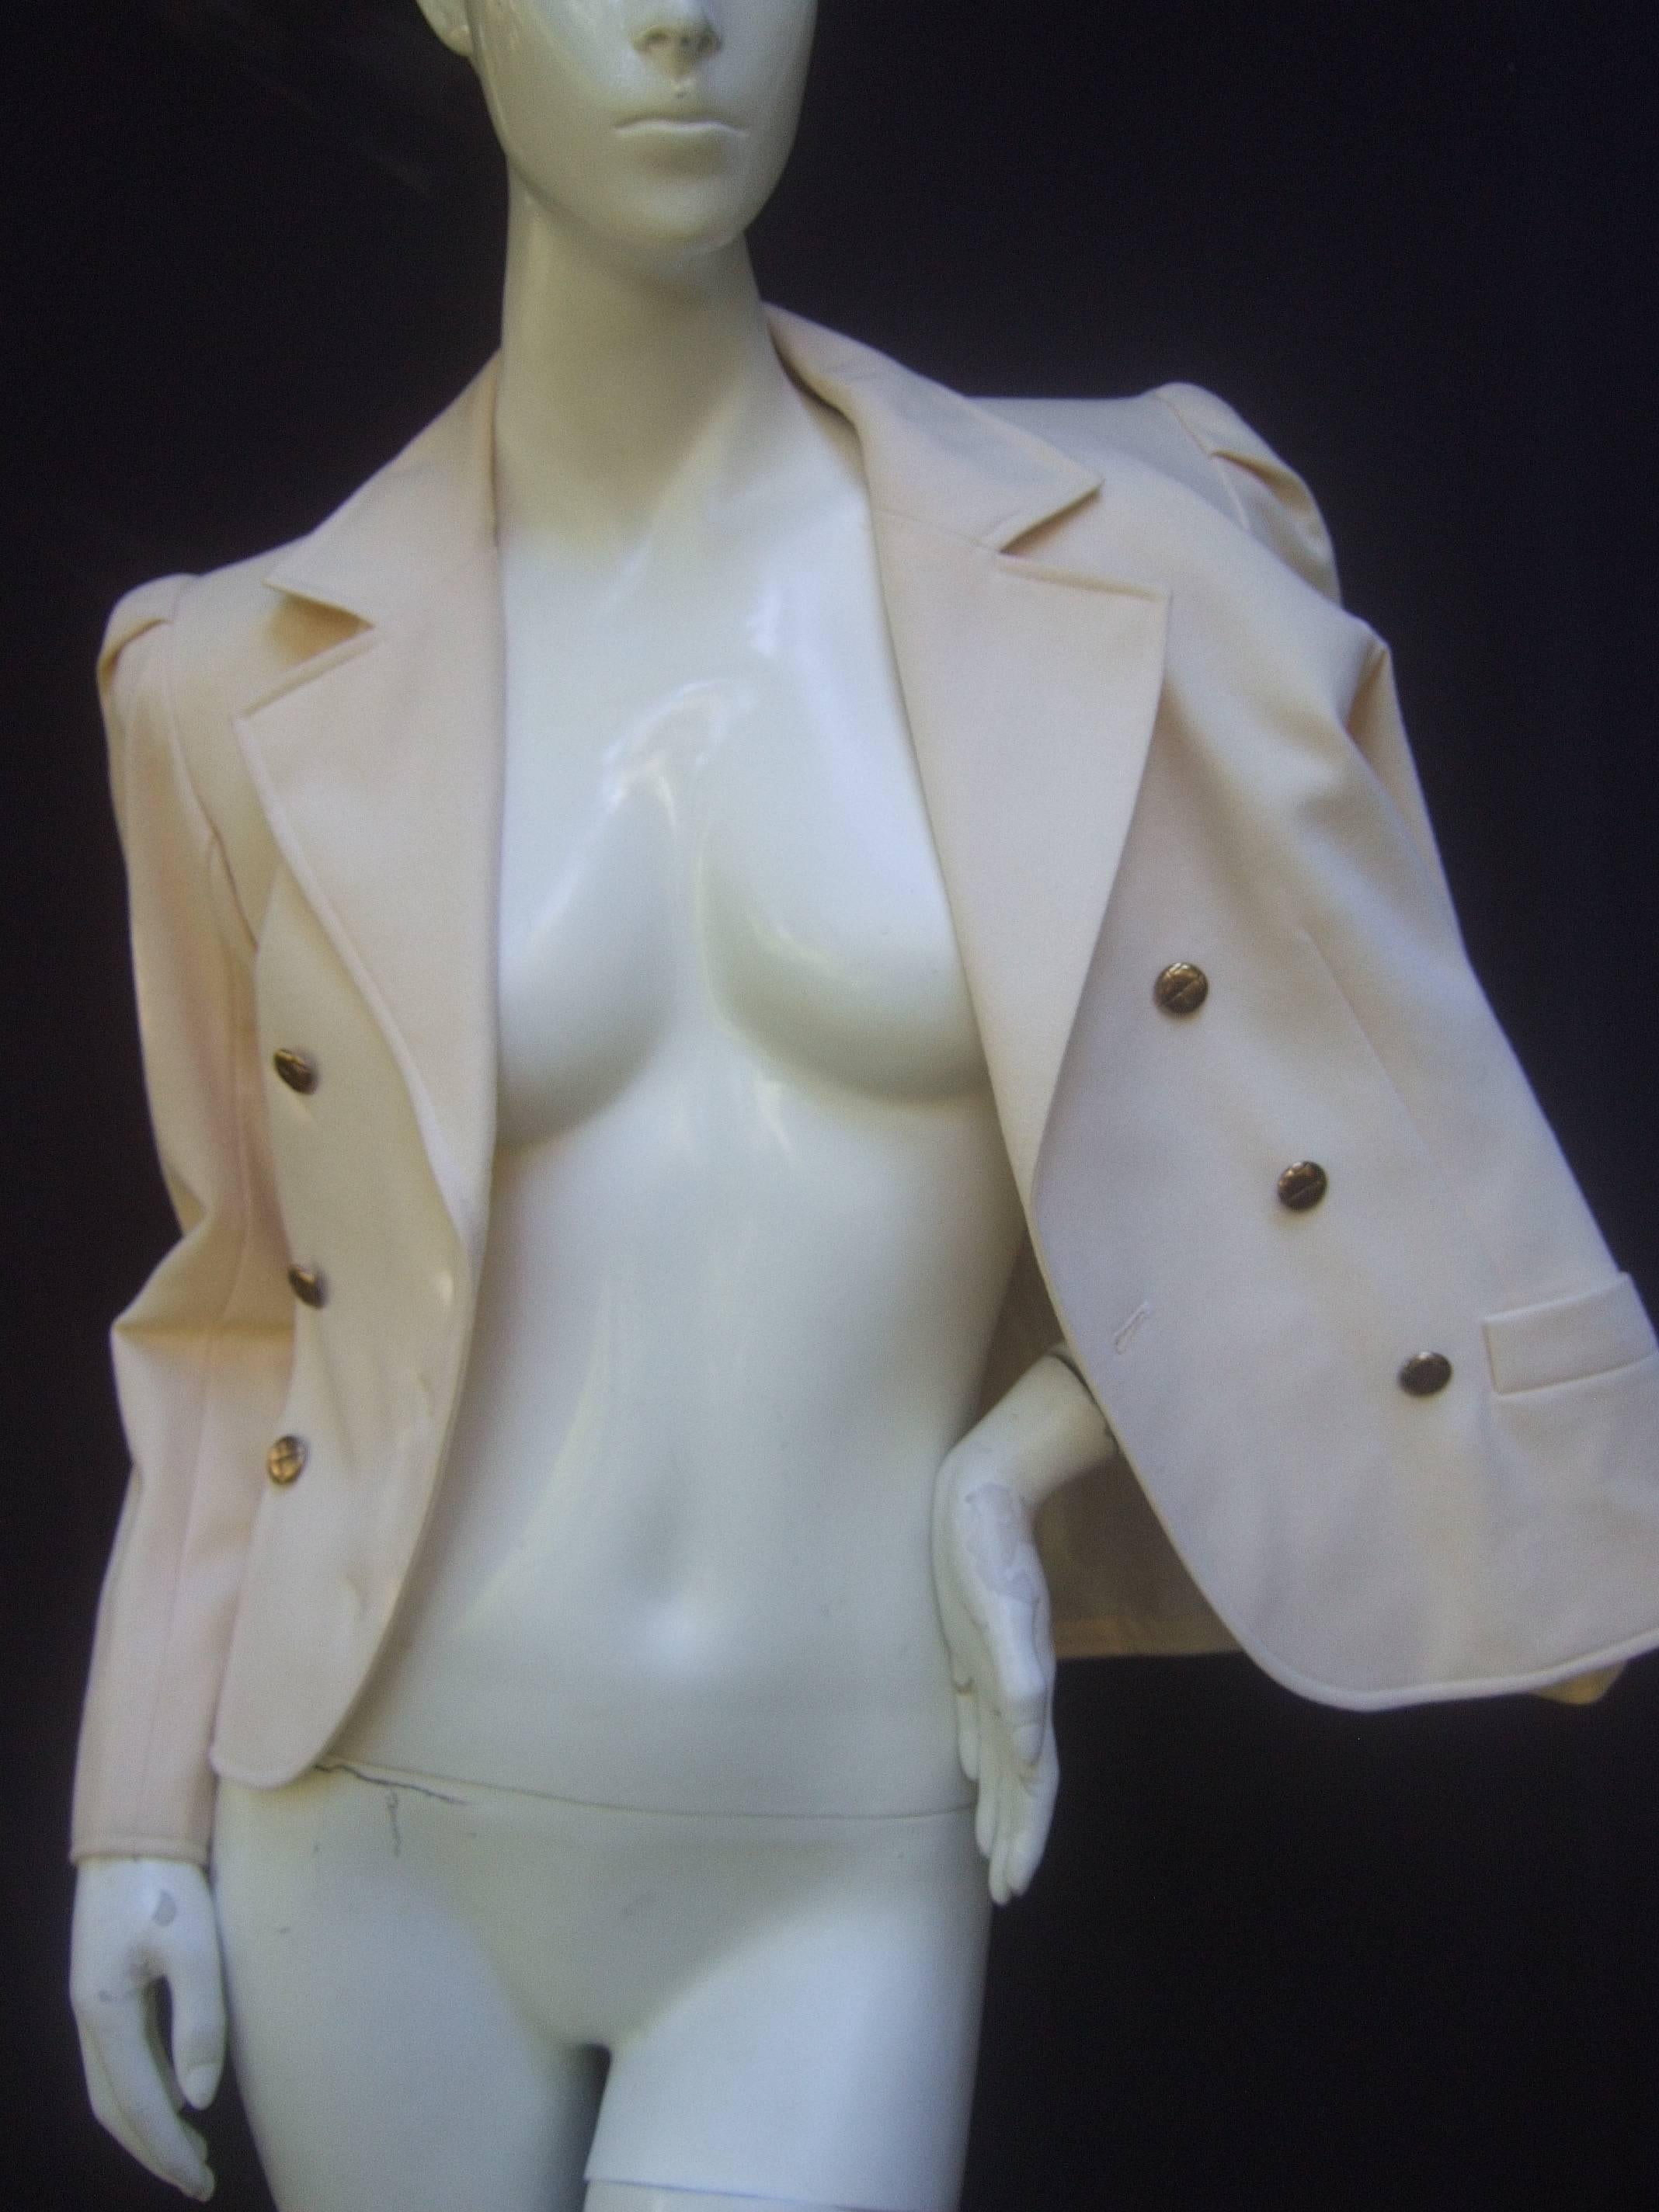 Saint Laurent Rive Gauche cream wool jacket c 1970s
The stylish jacket is designed with a set of six 
gilt metal buttons that run across the front 

The shoulders have a restrained pleated detail 
The lower front is designed with a pair of pockets